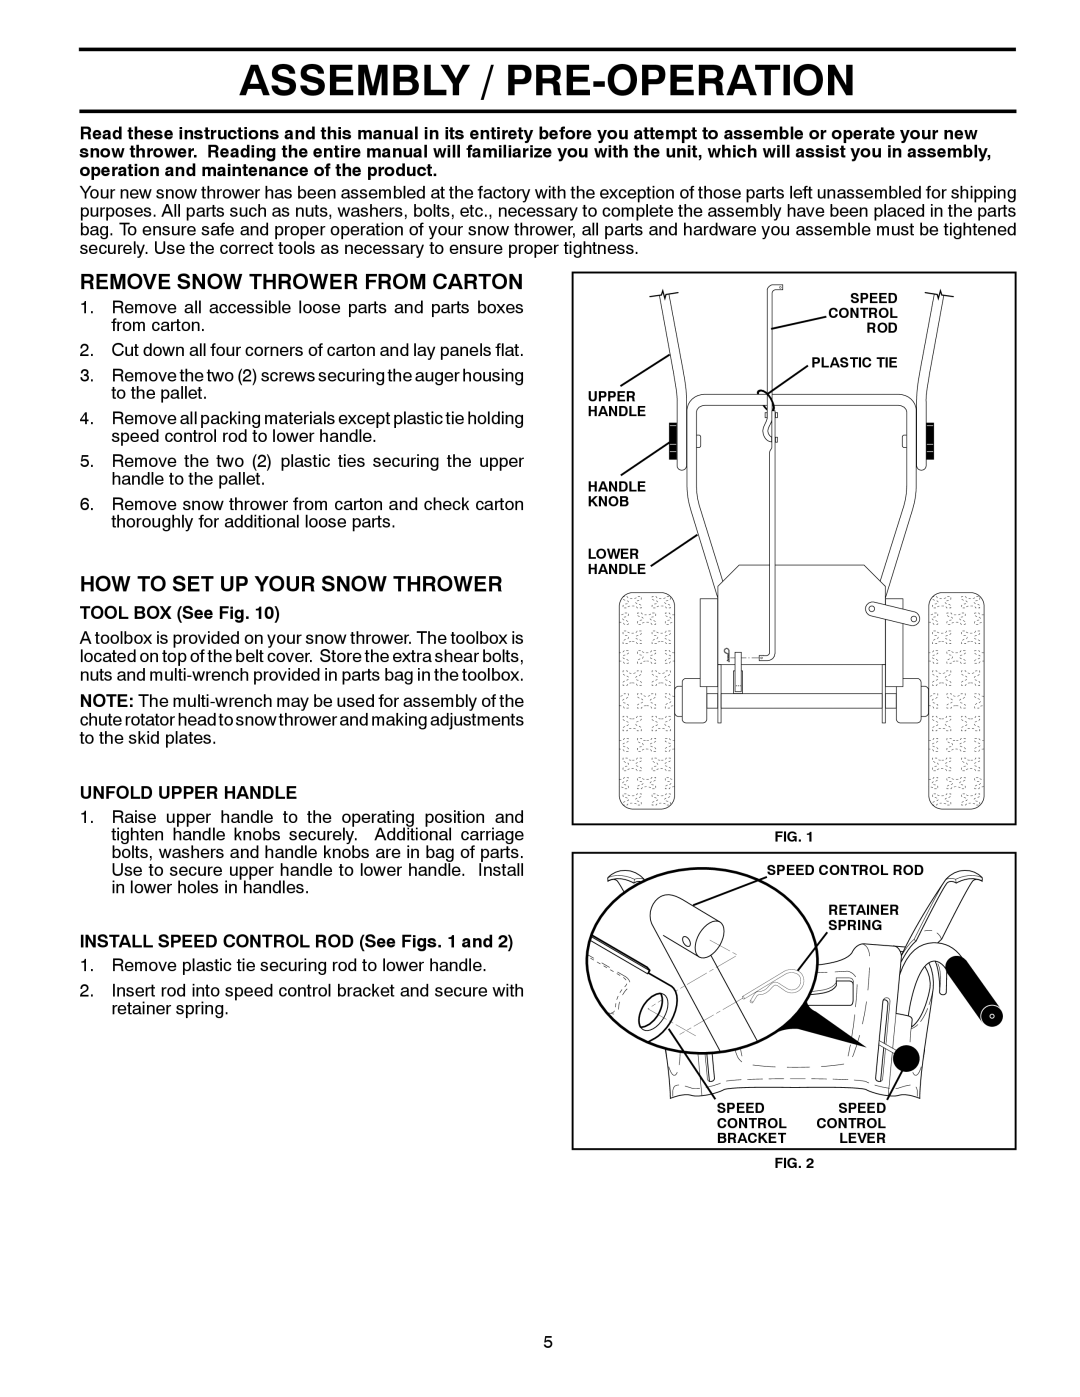 Husqvarna 96193006901 manual Assembly / Pre-Operation, Remove Snow Thrower From Carton, How To Set Up Your Snow Thrower 